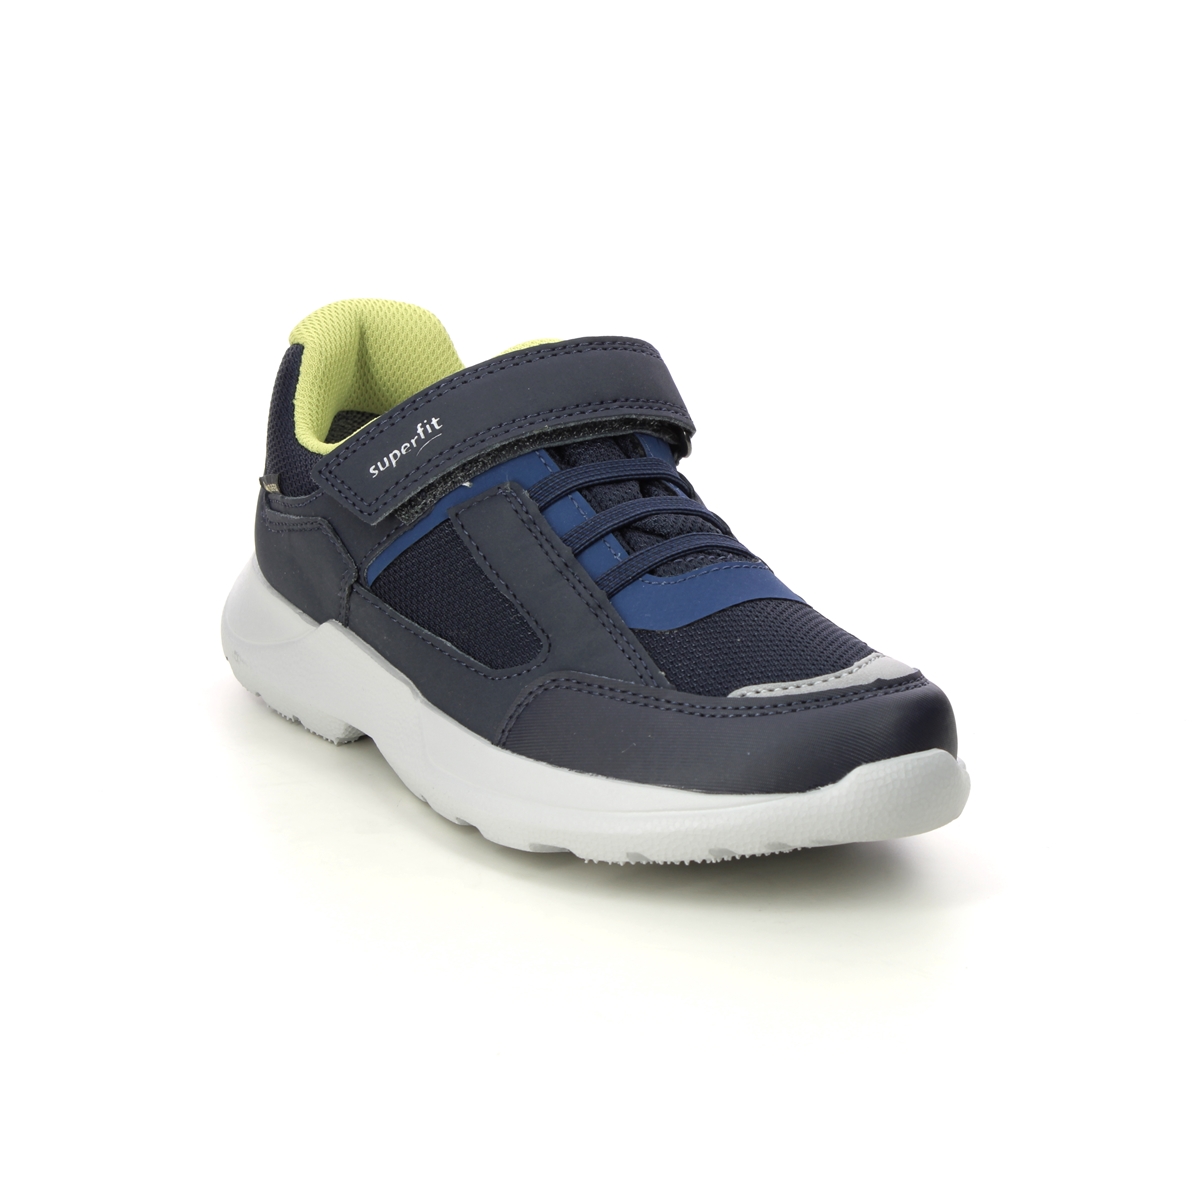 Superfit Rush Junior Boys Gtx Navy Lime Kids trainers 1006225-8000 in a Plain Man-made in Size 35